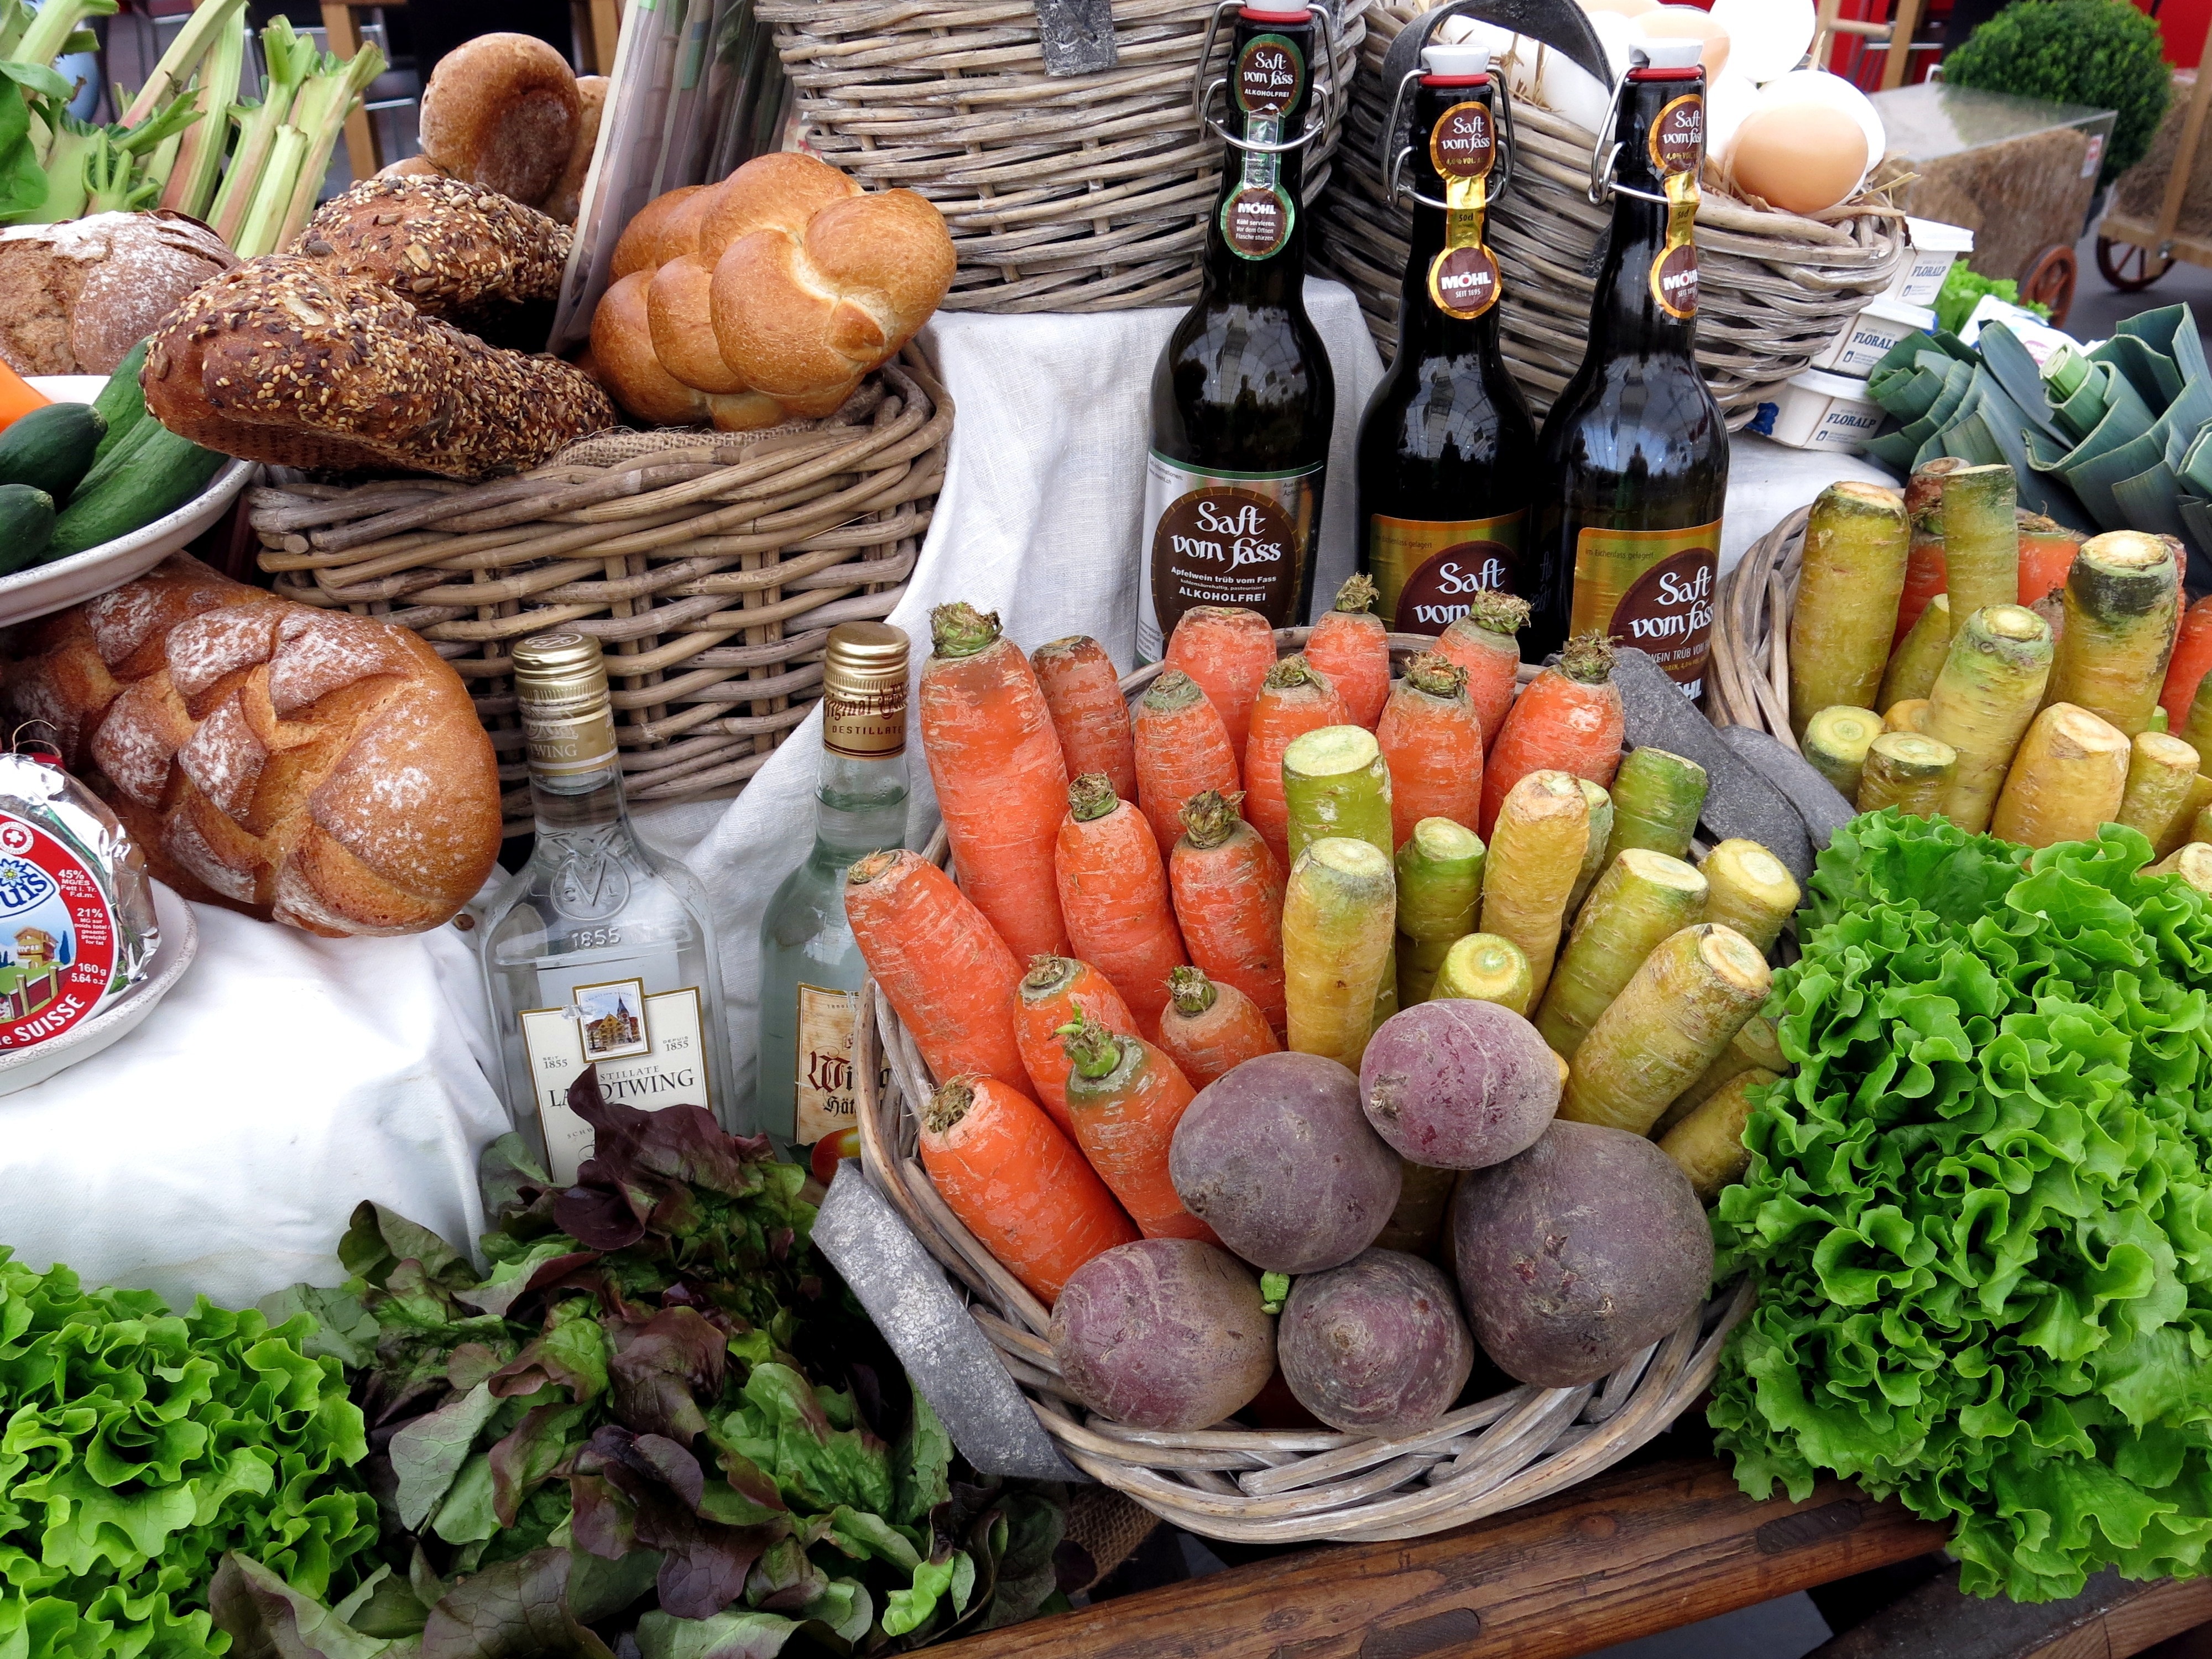 photo of variety of vegetable, wine, and bread on table